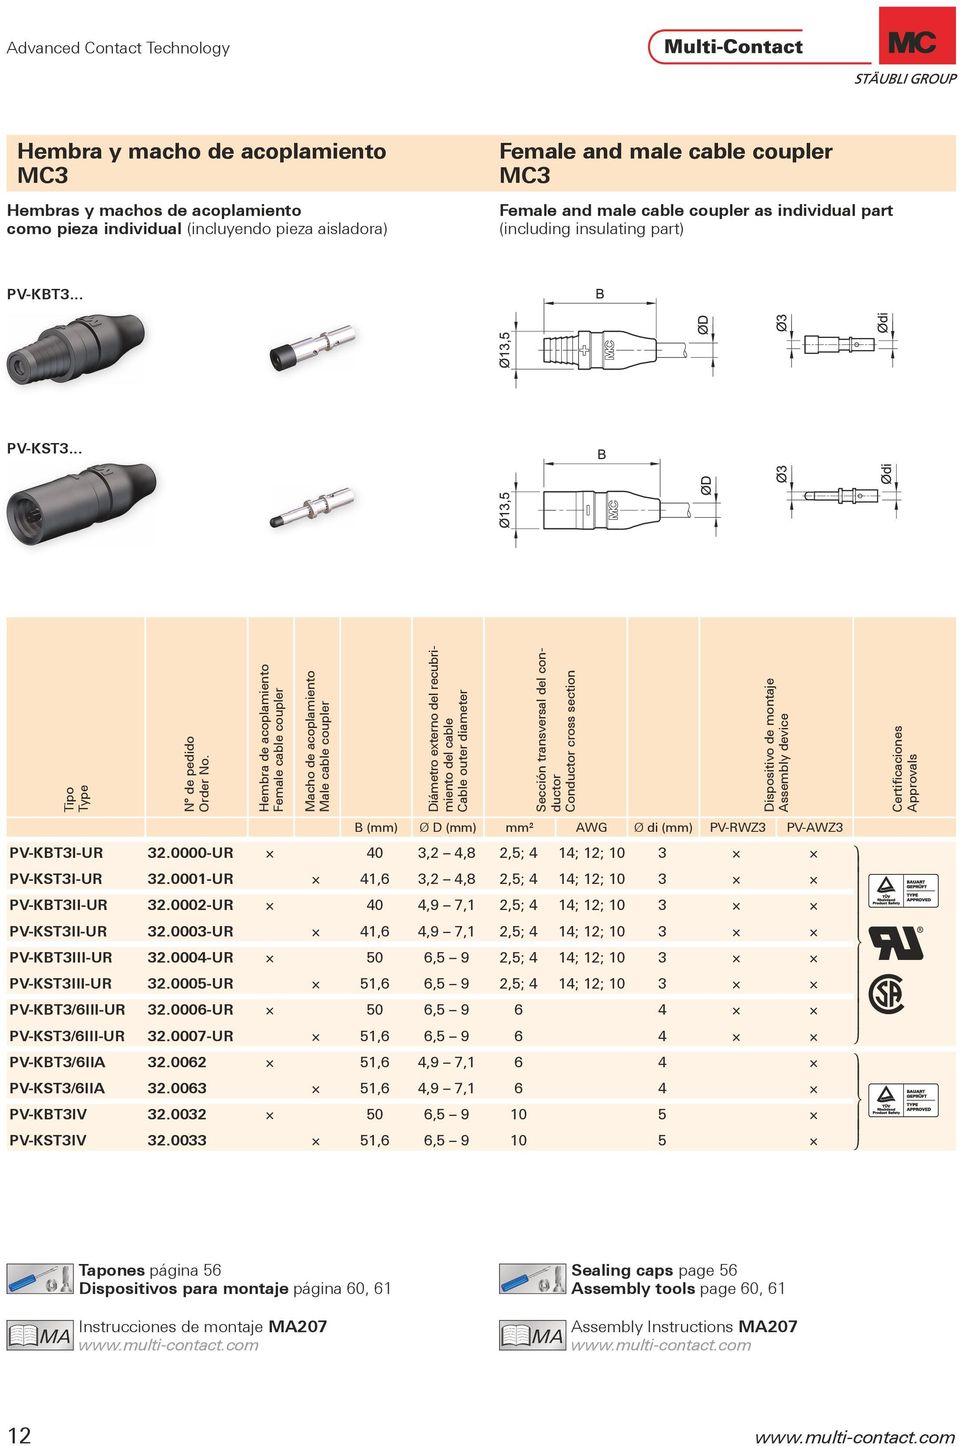 Female and male cable coupler as individual part (including insulating part) PV-KBT3... PV-KST3... Tipo Type Nº de pedido Order No.